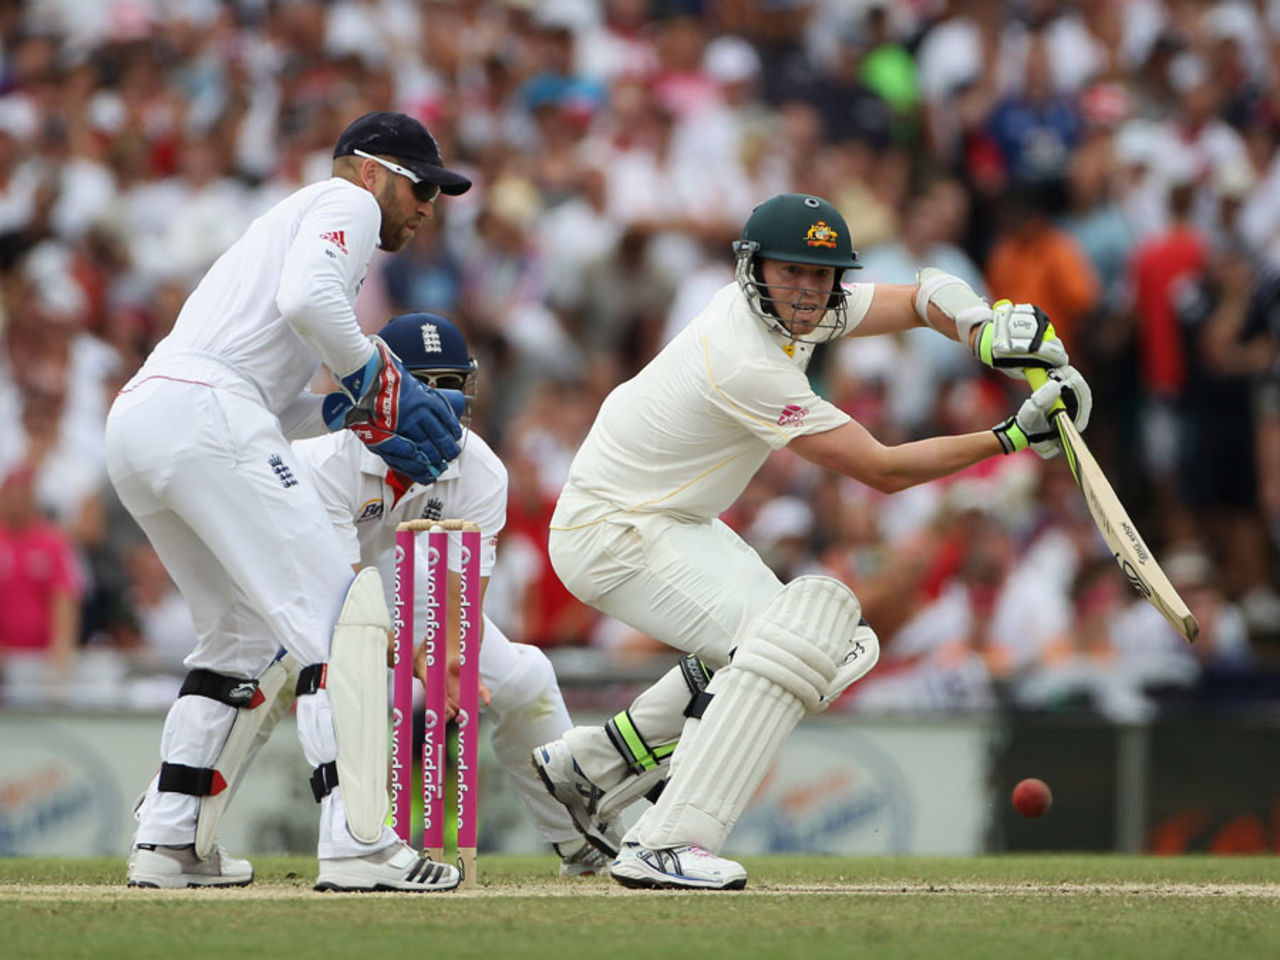 Peter Siddle cuts fine during his 43, Australia v England, 5th Test, Sydney, 5th day, January 7, 2011